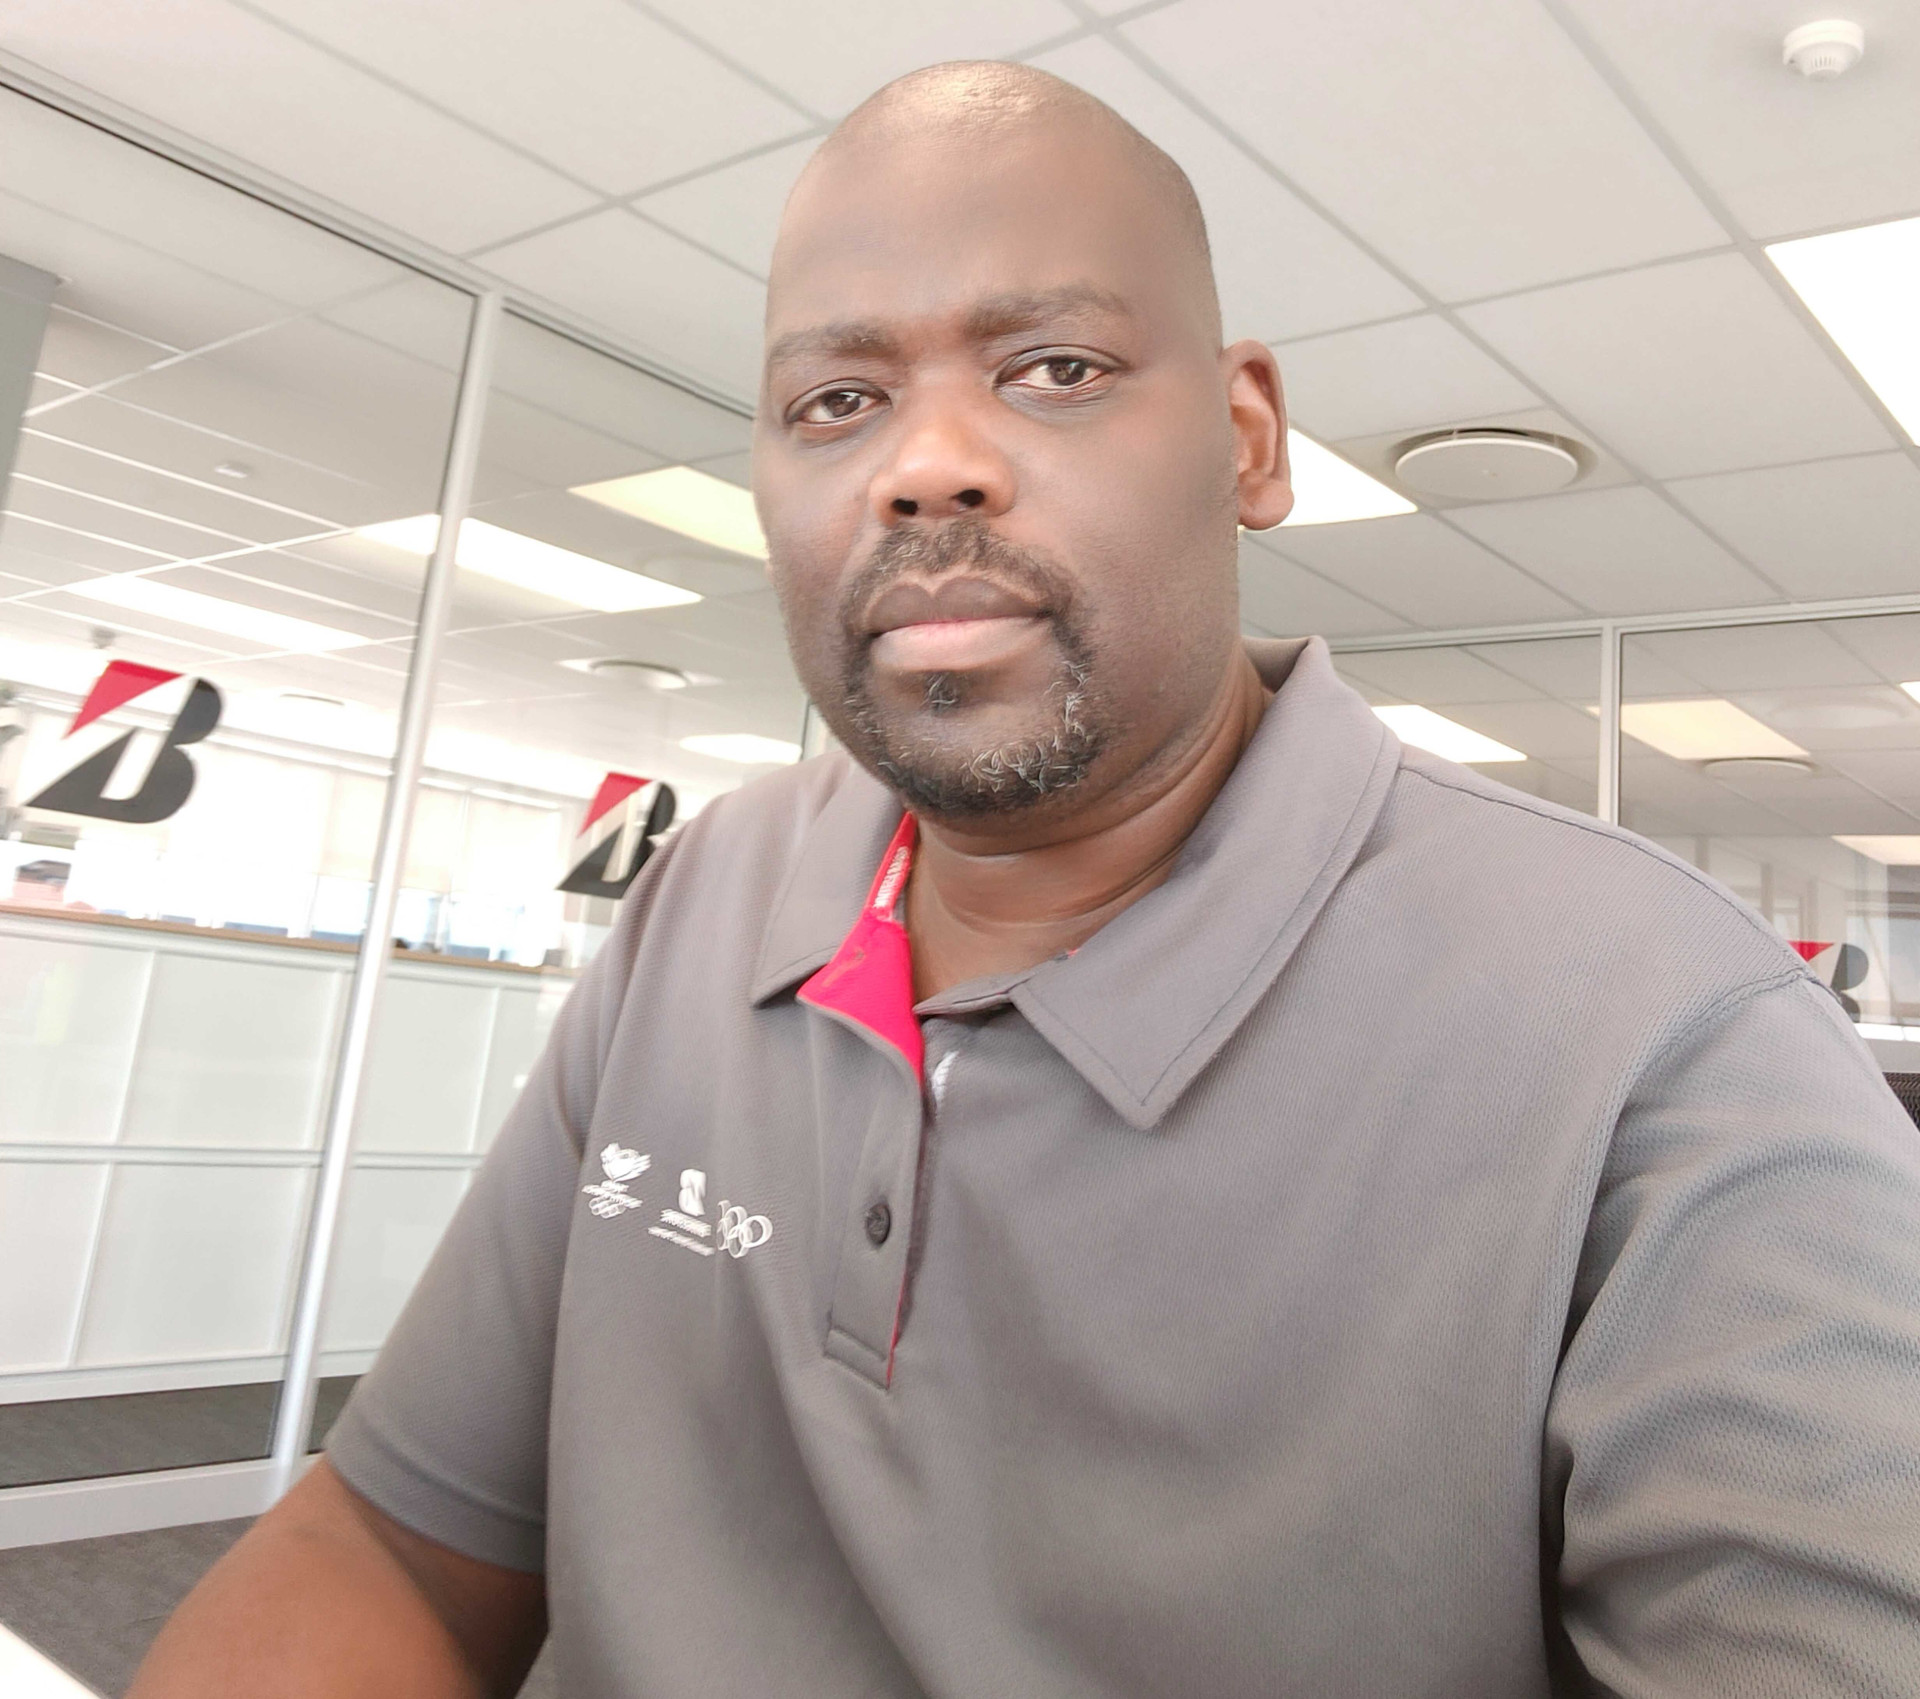 Bridgestone Southern Africa continue its commitment to take care of its employees